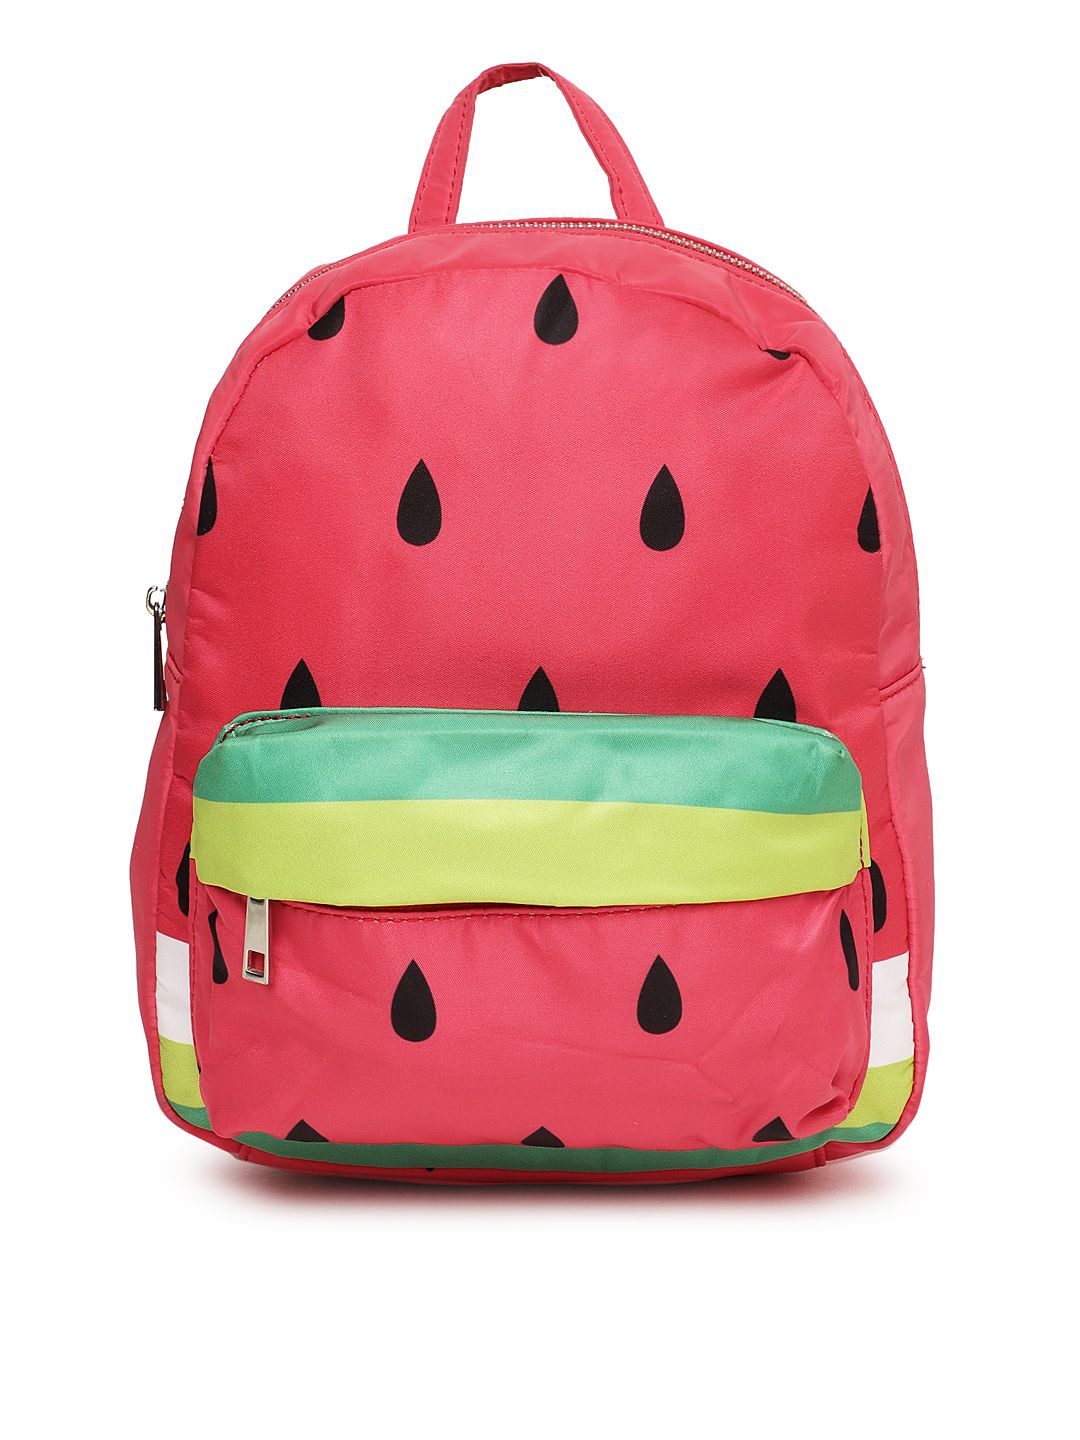 FOREVER 21 Women Pink Printed Backpack Price in India